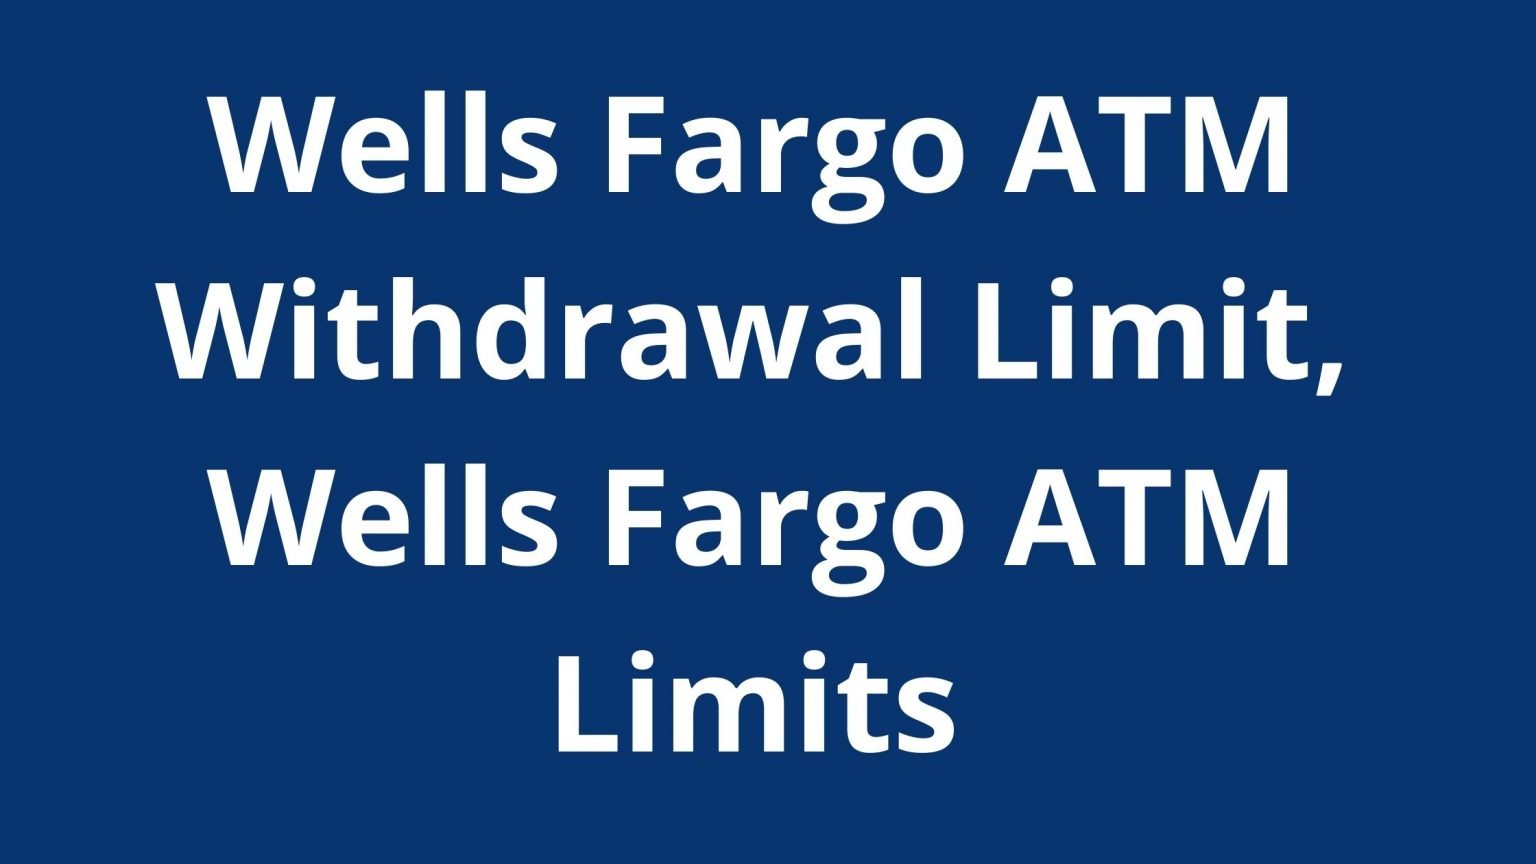 Wells Fargo ATM Withdrawal Limit The Business Alert